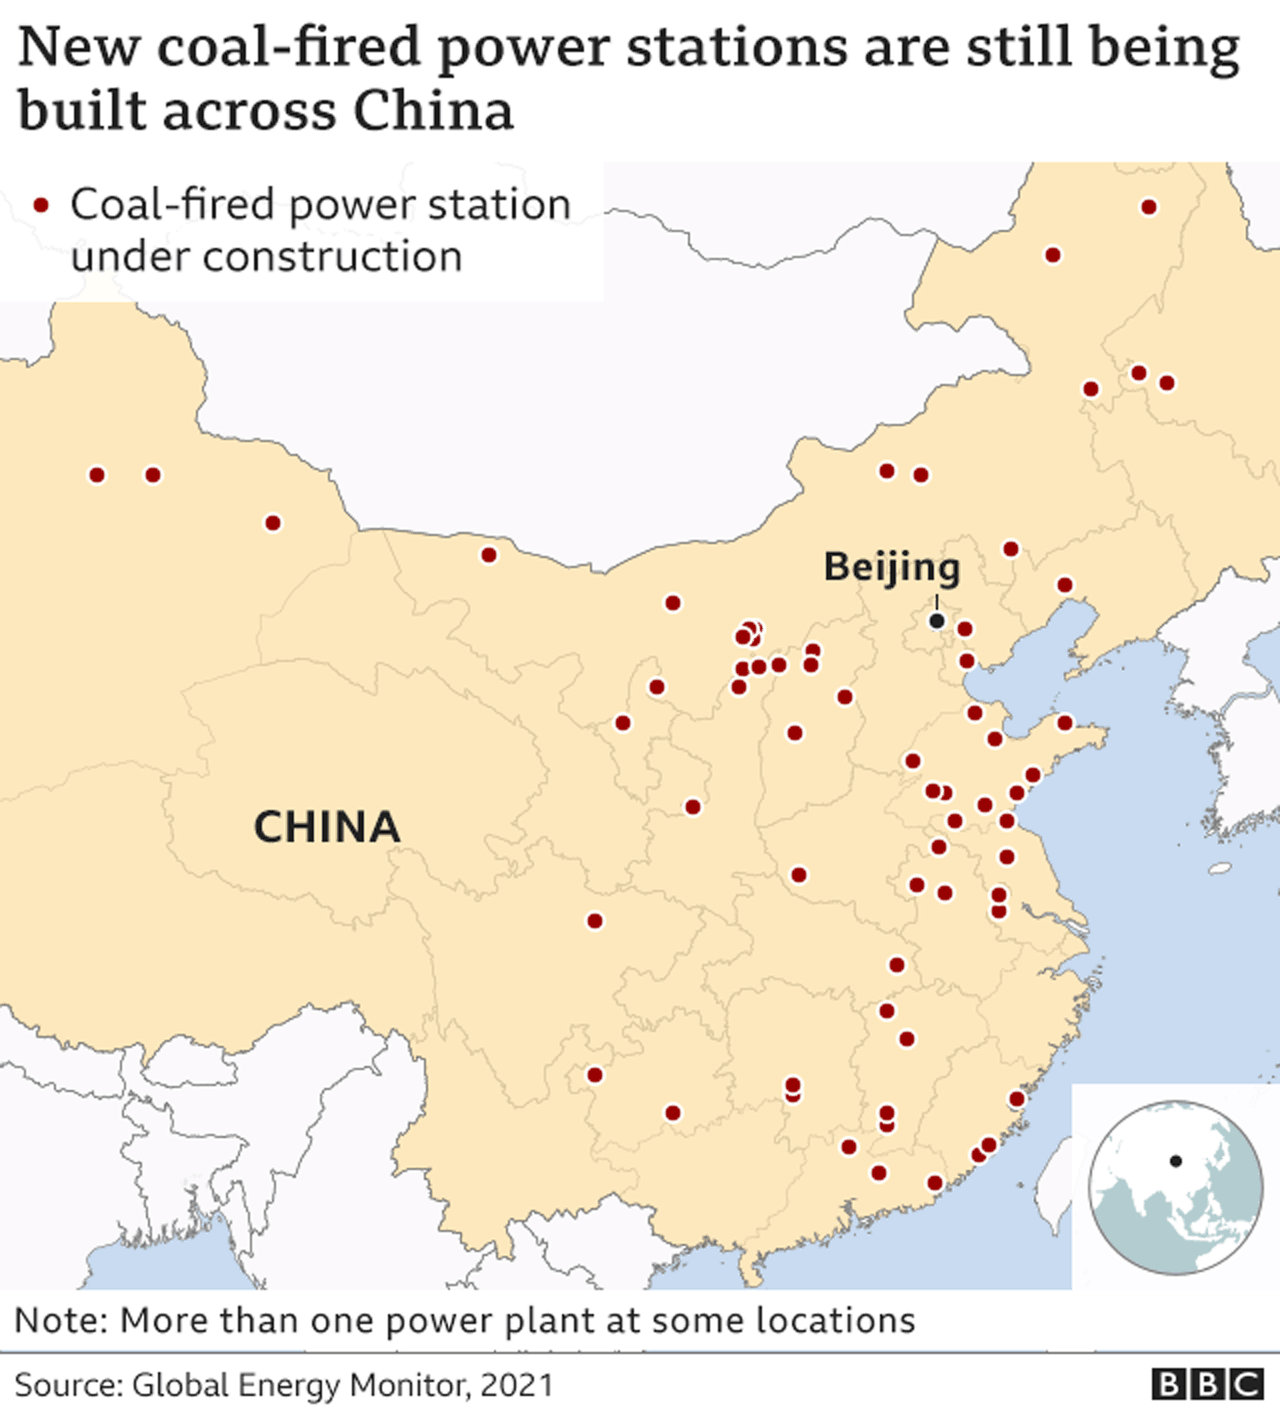 Map showing new coal-fired power stations being built across China